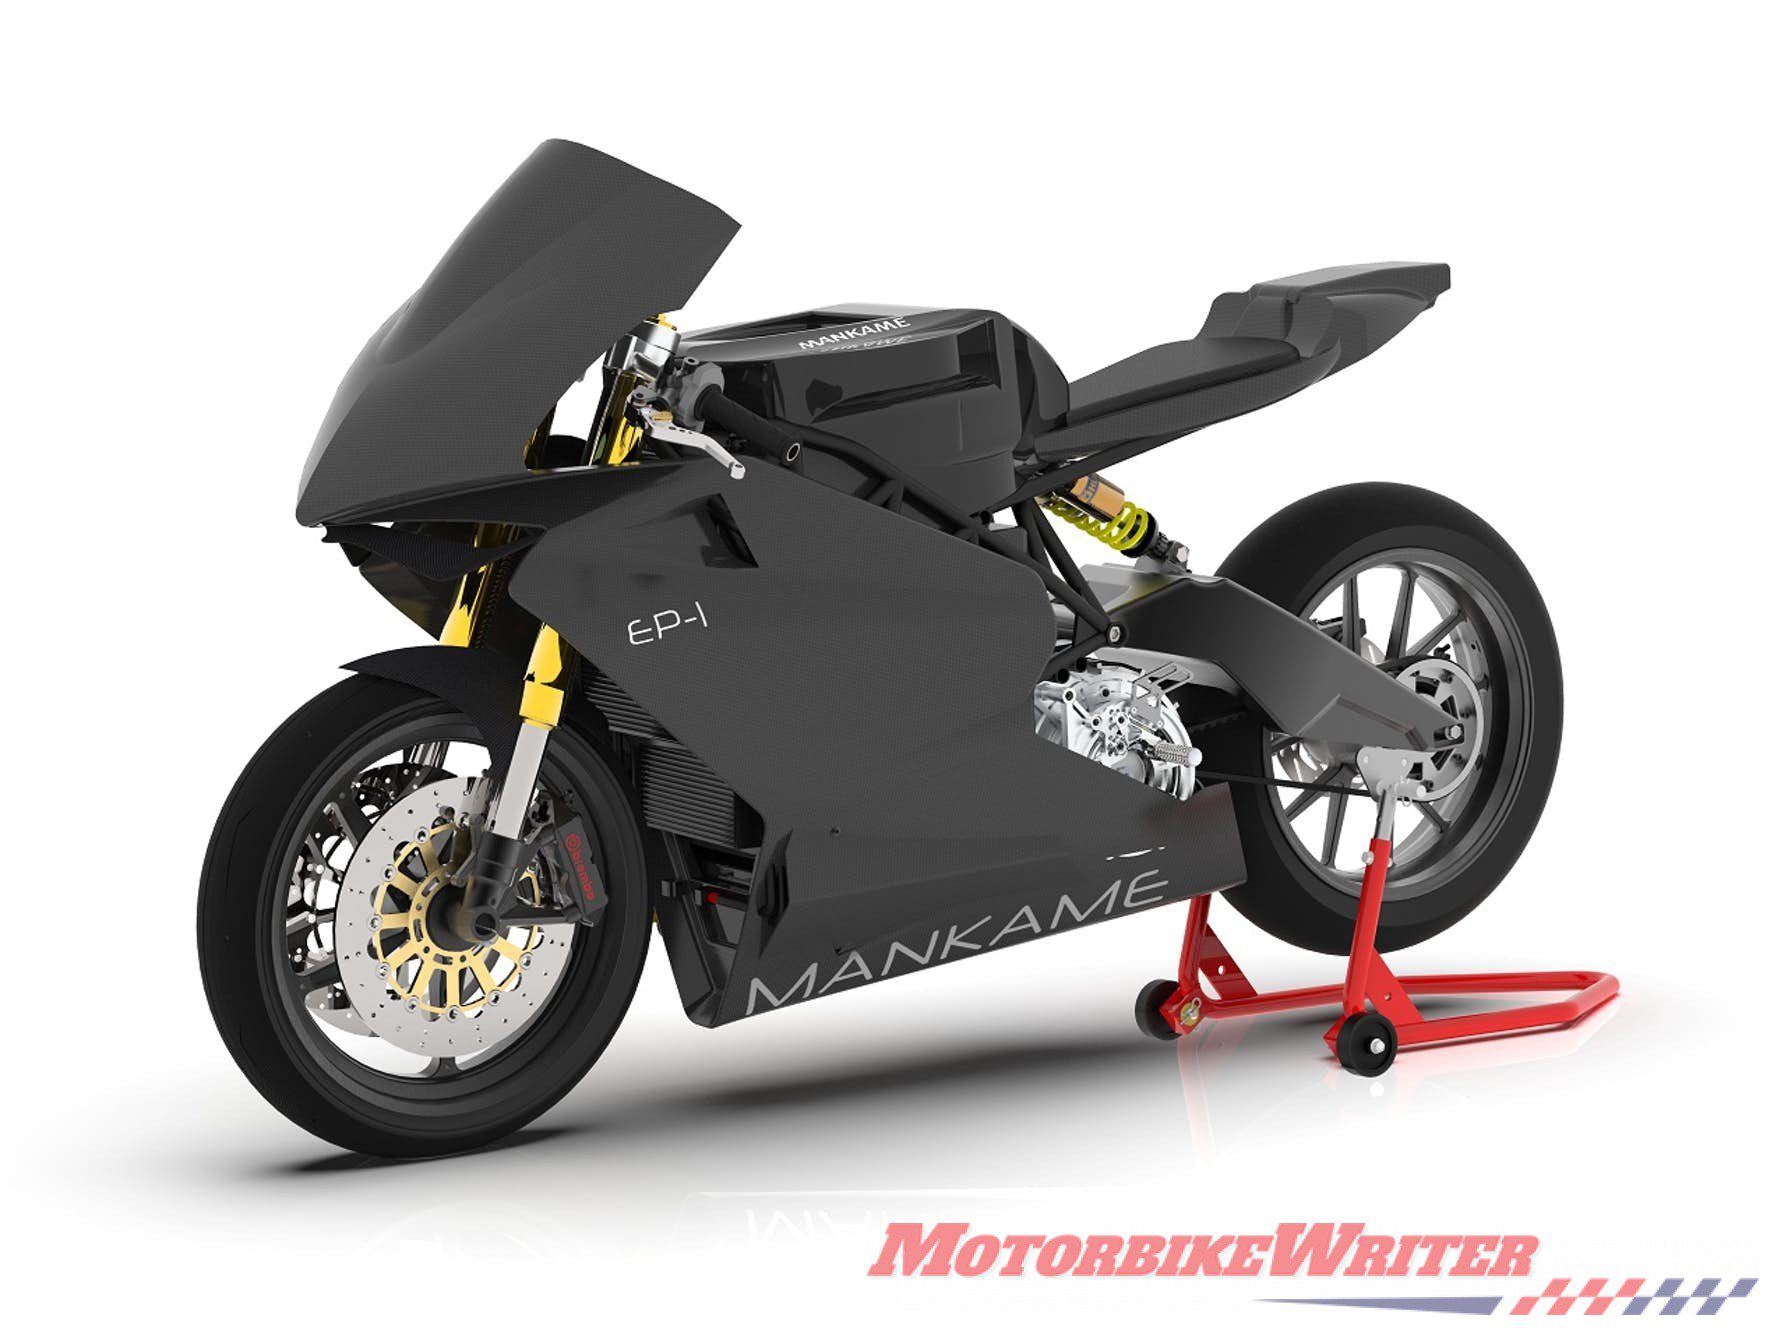 Mankame Motors EP-1 electric motorcycle with a claimed 480km range vector